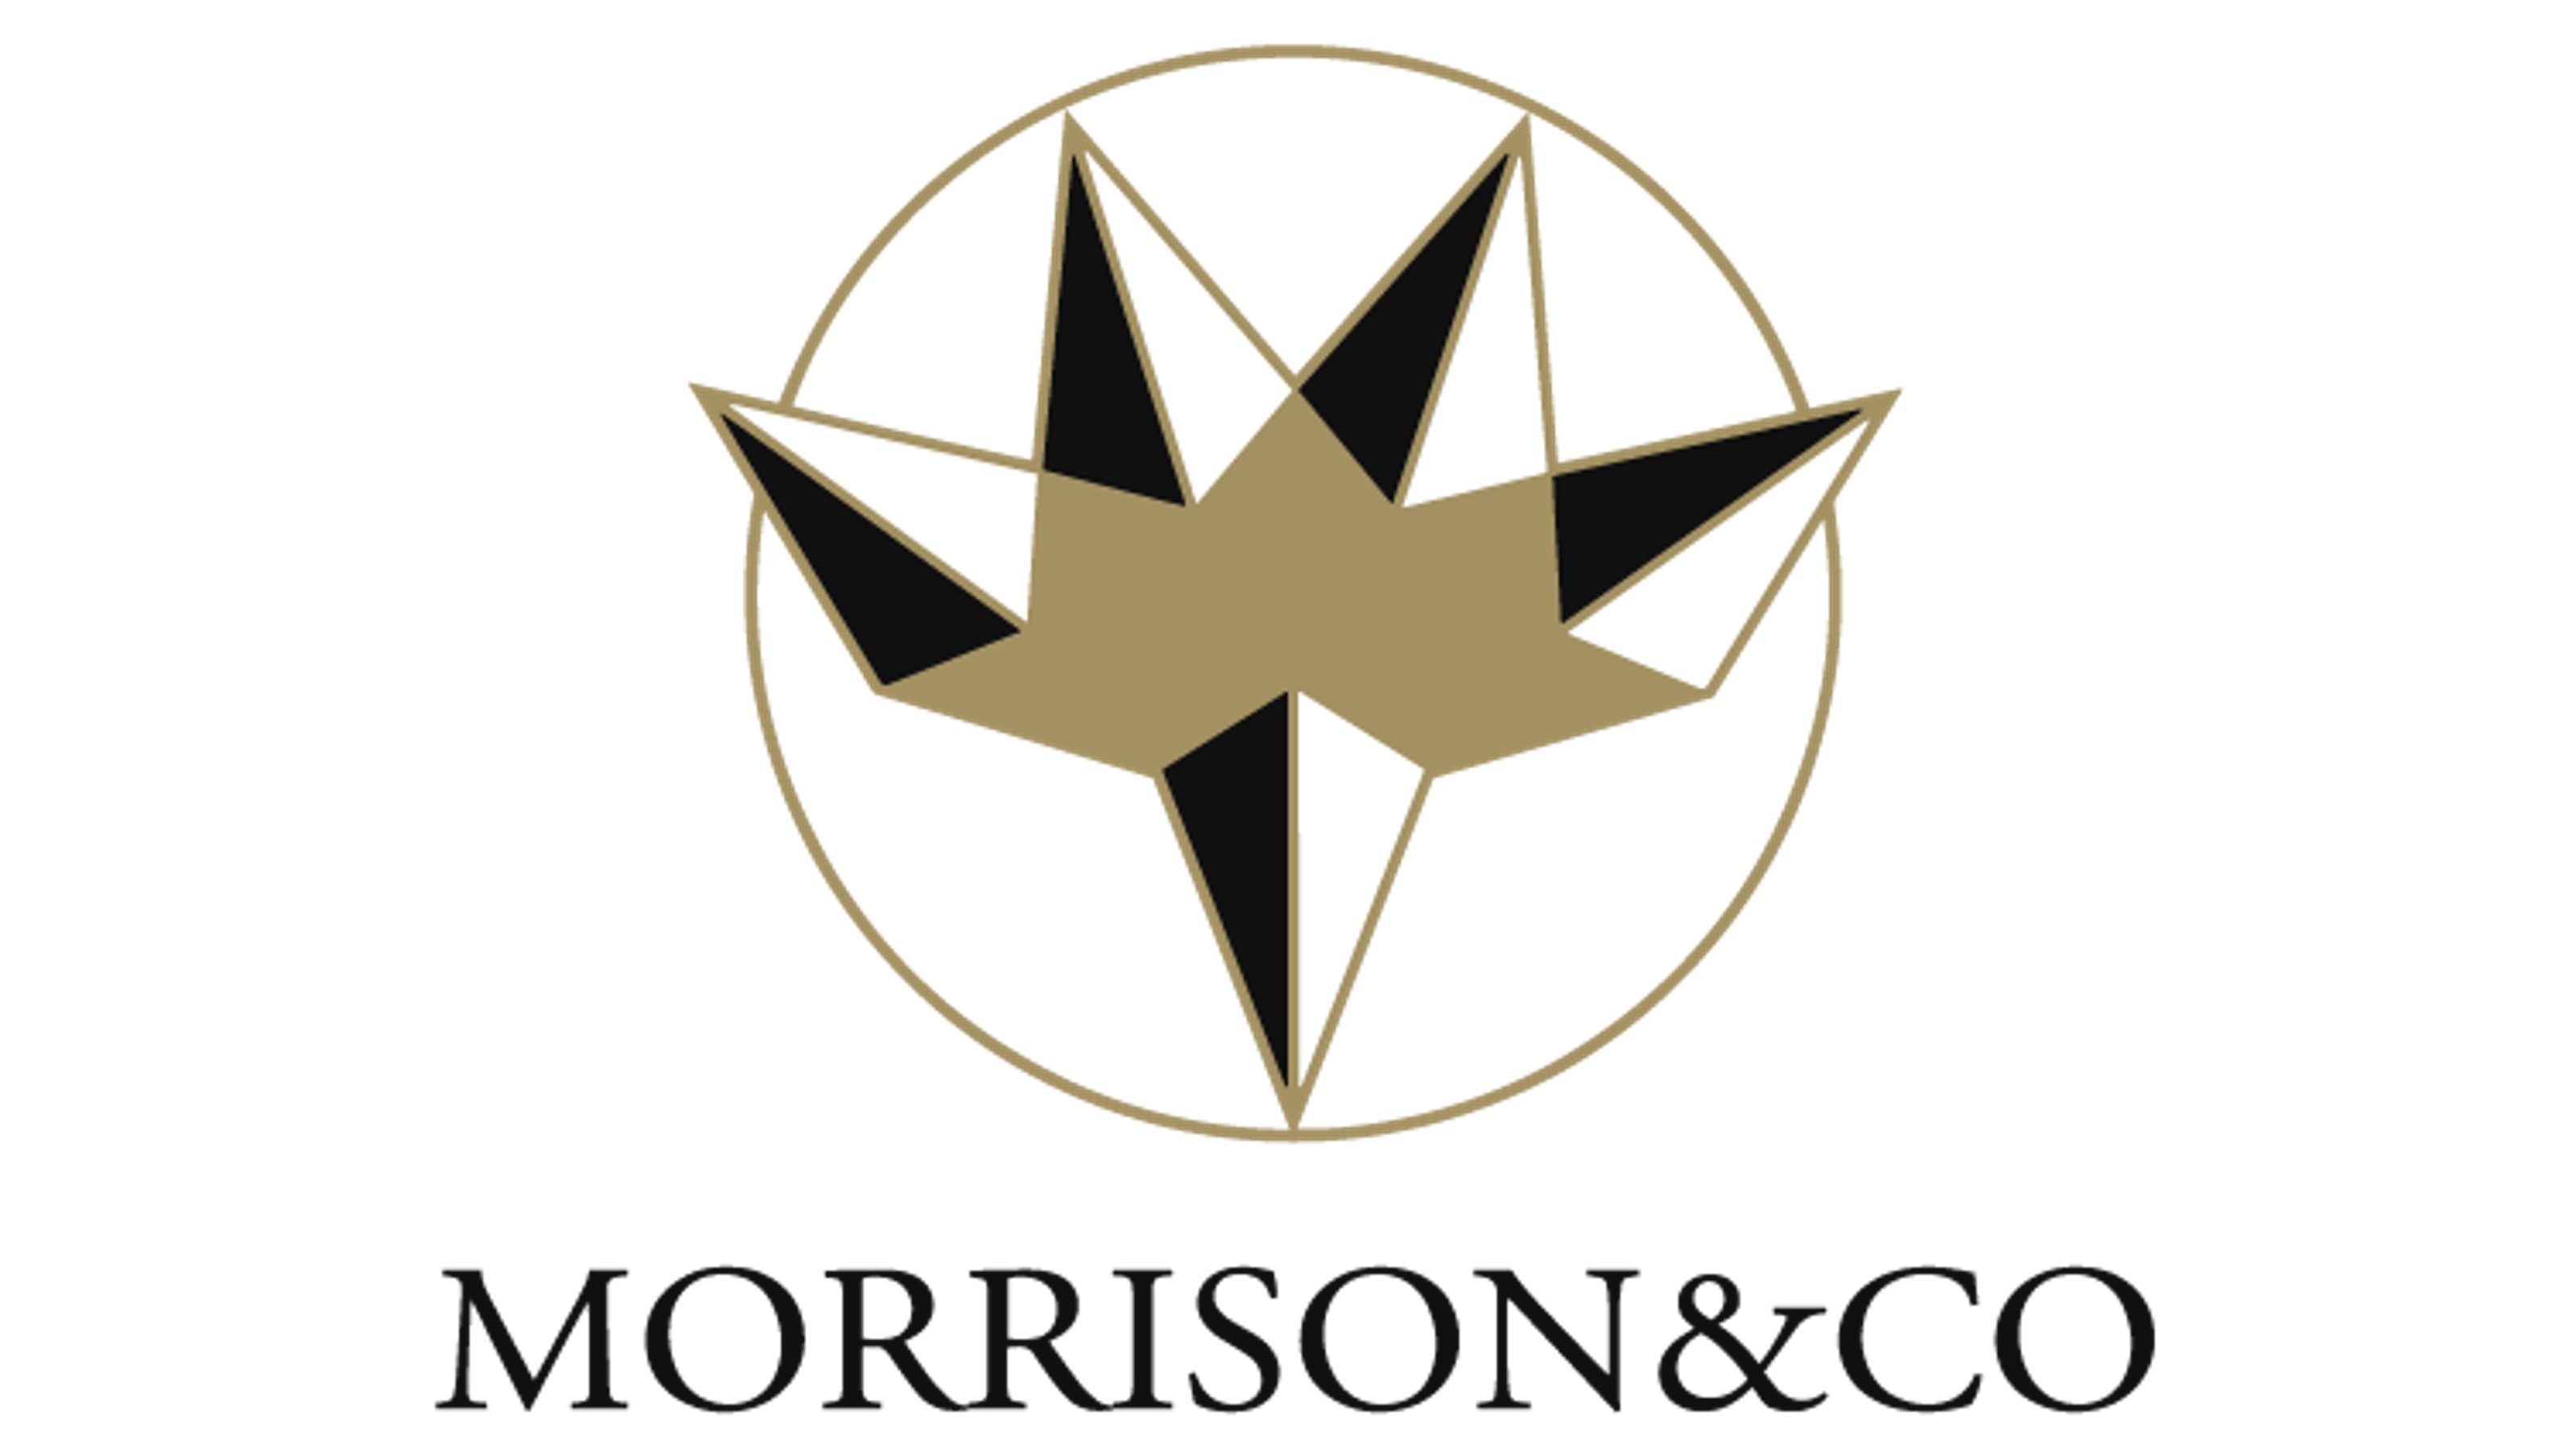 Morrison and Co logo.